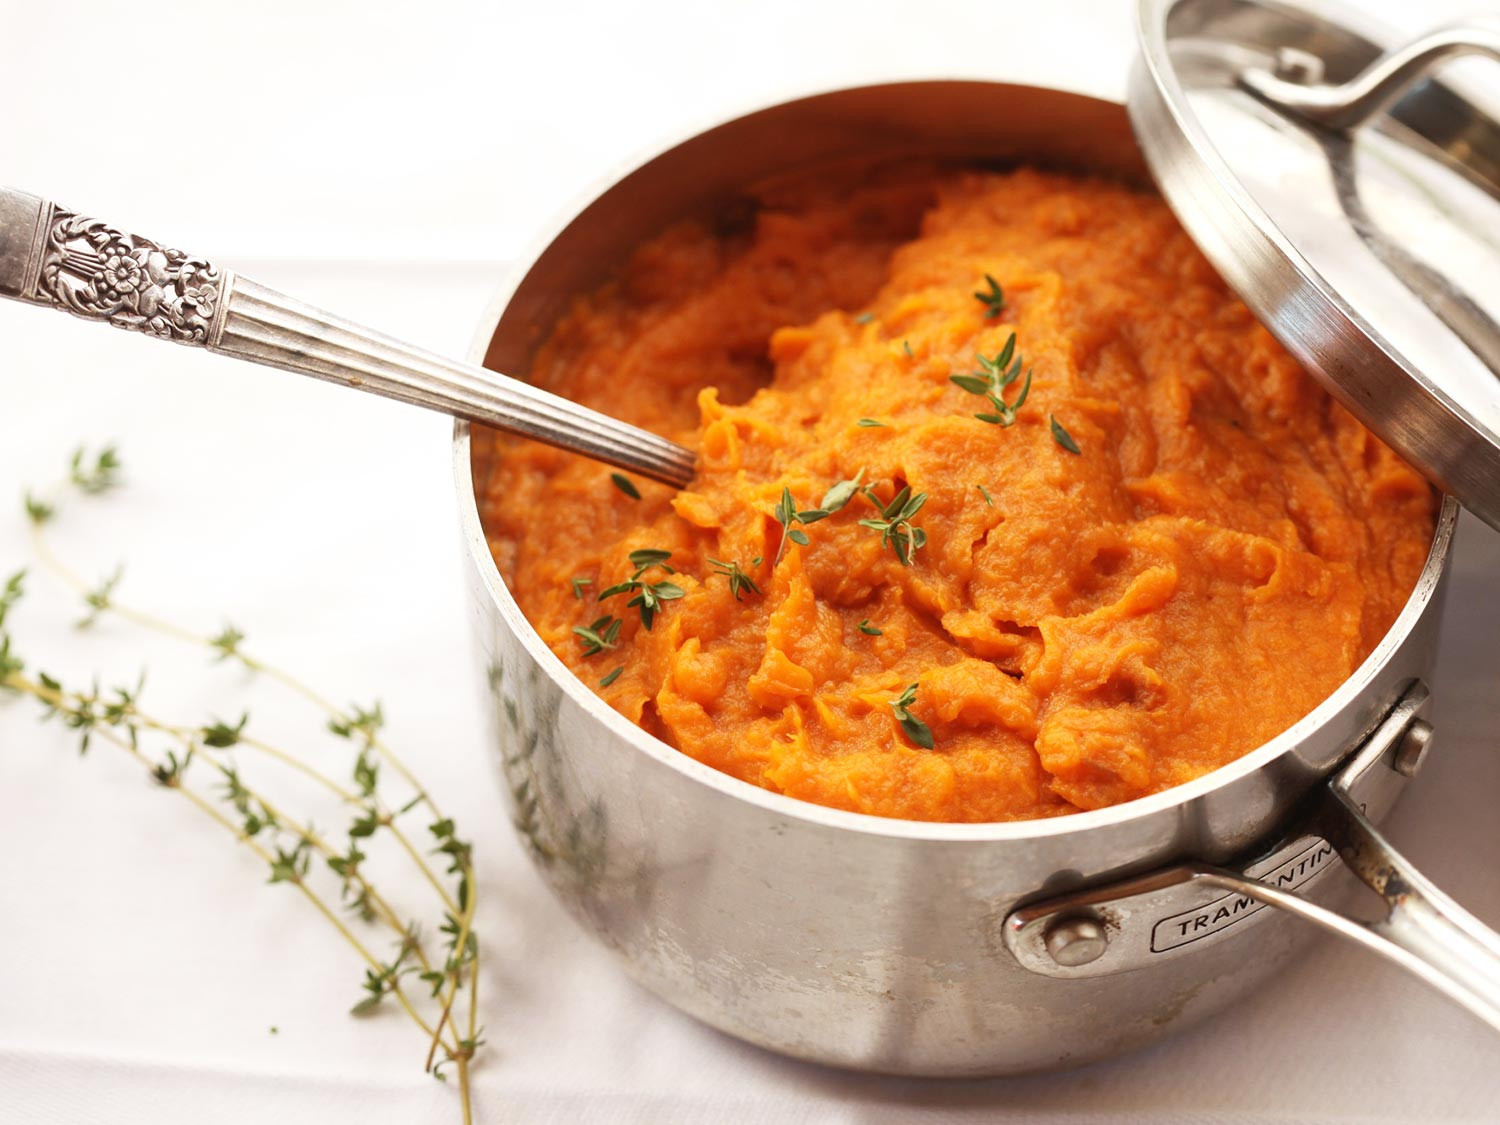 Yam Recipe For Thanksgiving
 14 Sweet Potato Recipes for Thanksgiving That Are Just